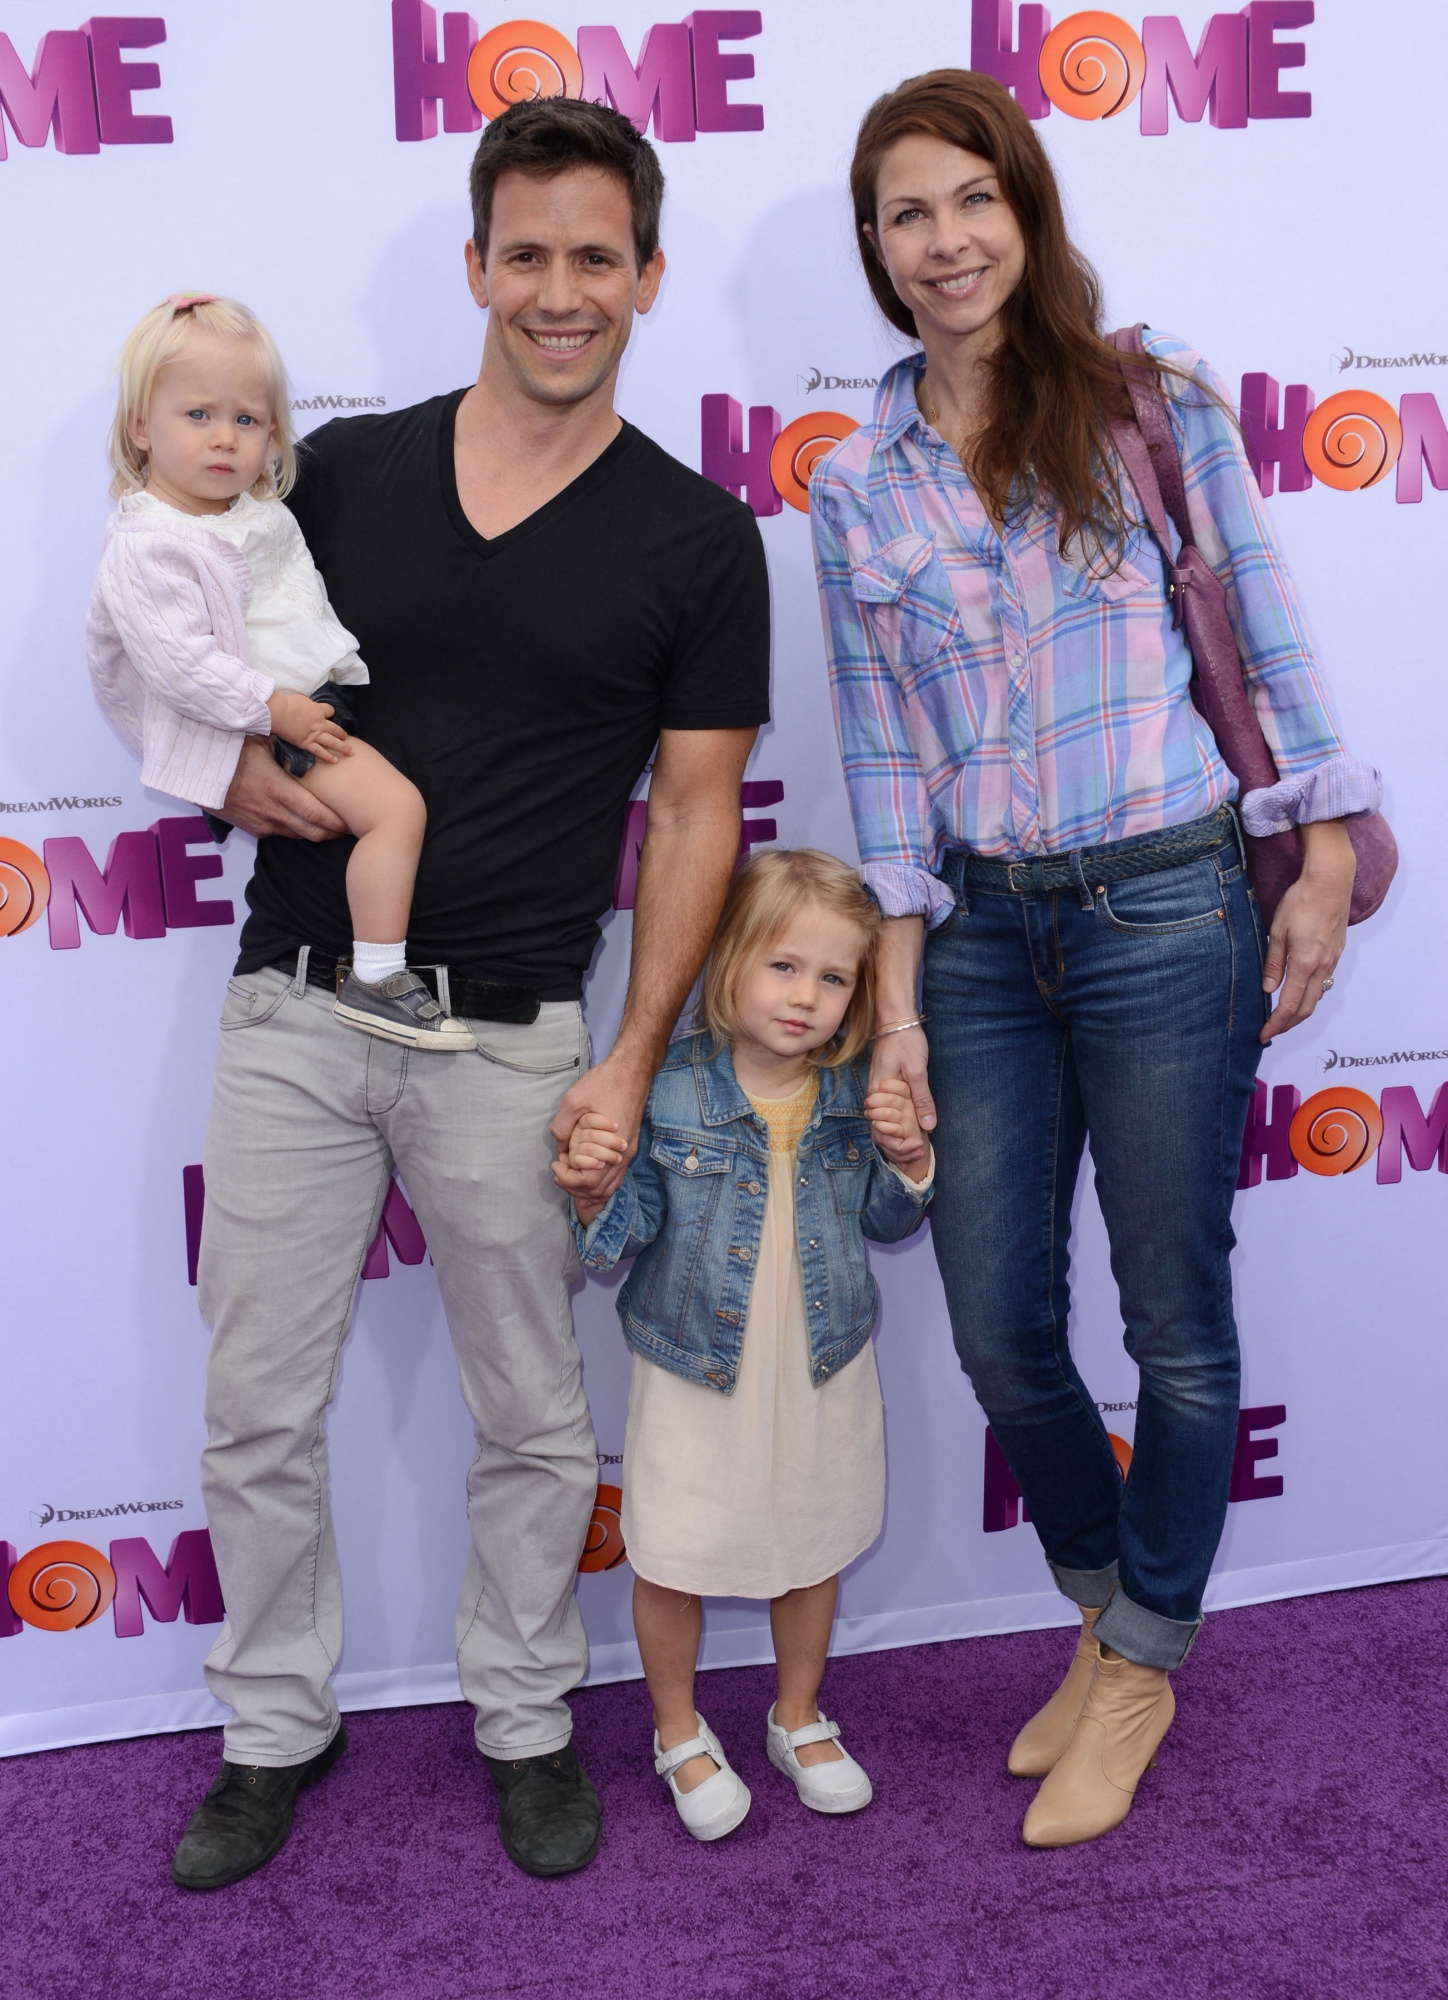 Actor Christian Oliver with his family arrives for the premiere of 'Home' at the Regency Village theatre in Westwood, California, March 22, 2015. German-born Hollywood actor Christian Oliver was killed along with his two young daughters as their small plane plummeted into the Caribbean Sea moments after takeoff, local police said January 5, 2024. (Photo by Chris DELMAS / AFP)